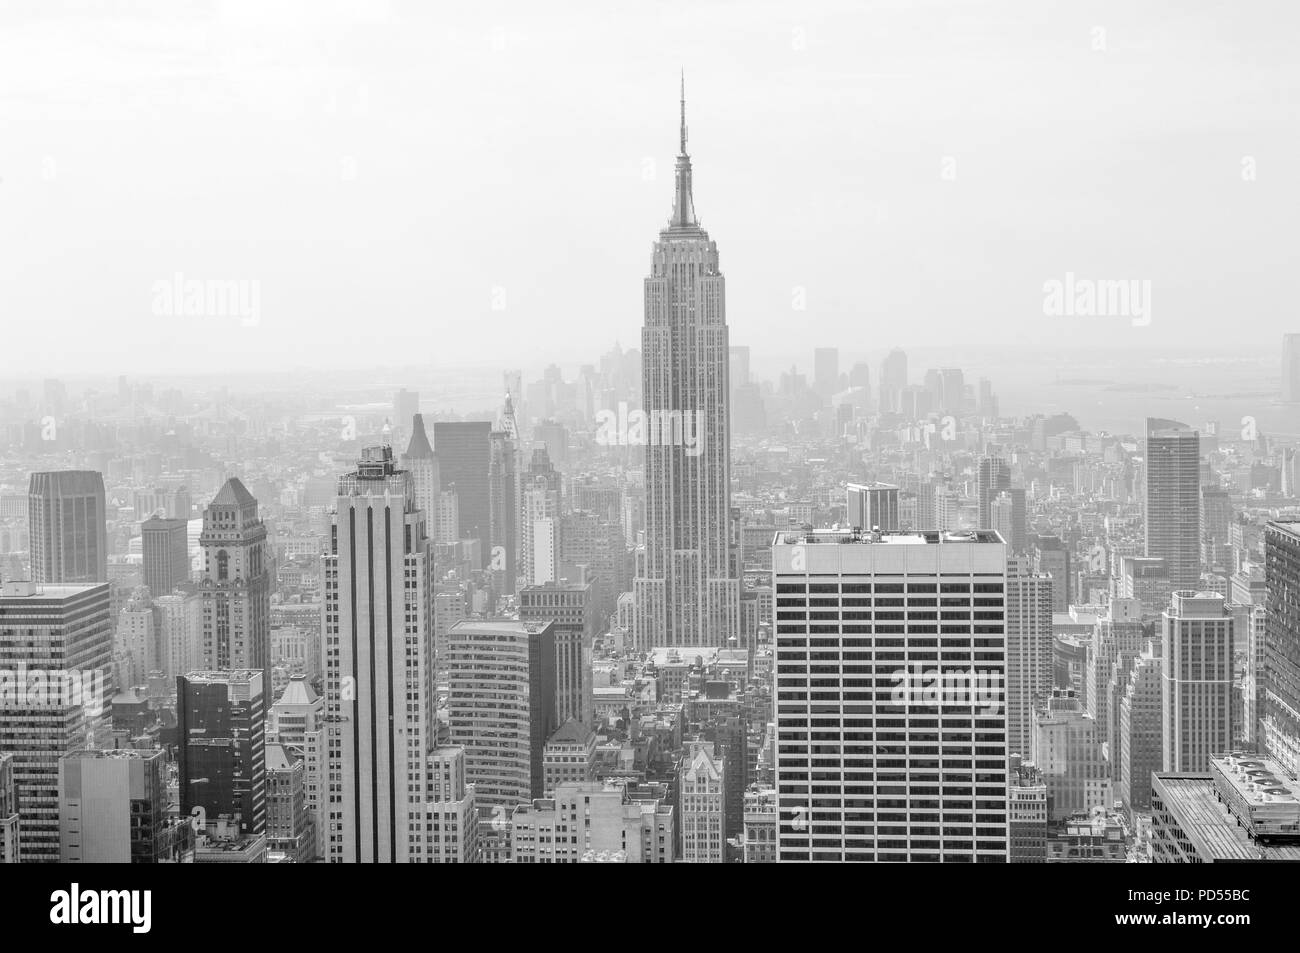 Sepia-colored view of midtown and downtown Manhattan from above Stock Photo